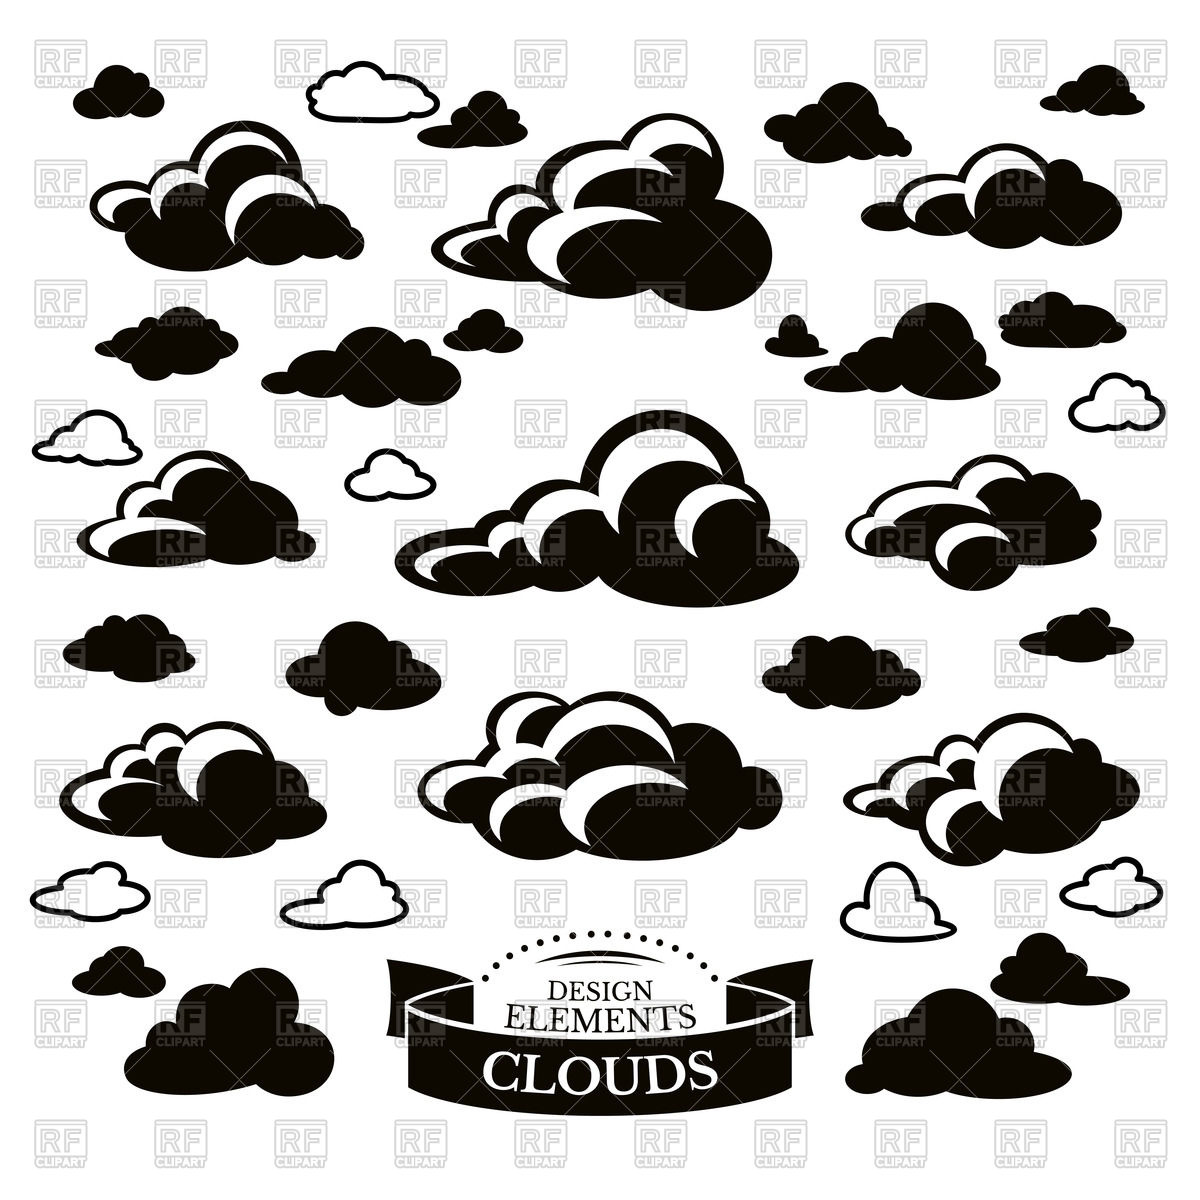 The download and upload to cloud icon Royalty Free Vector